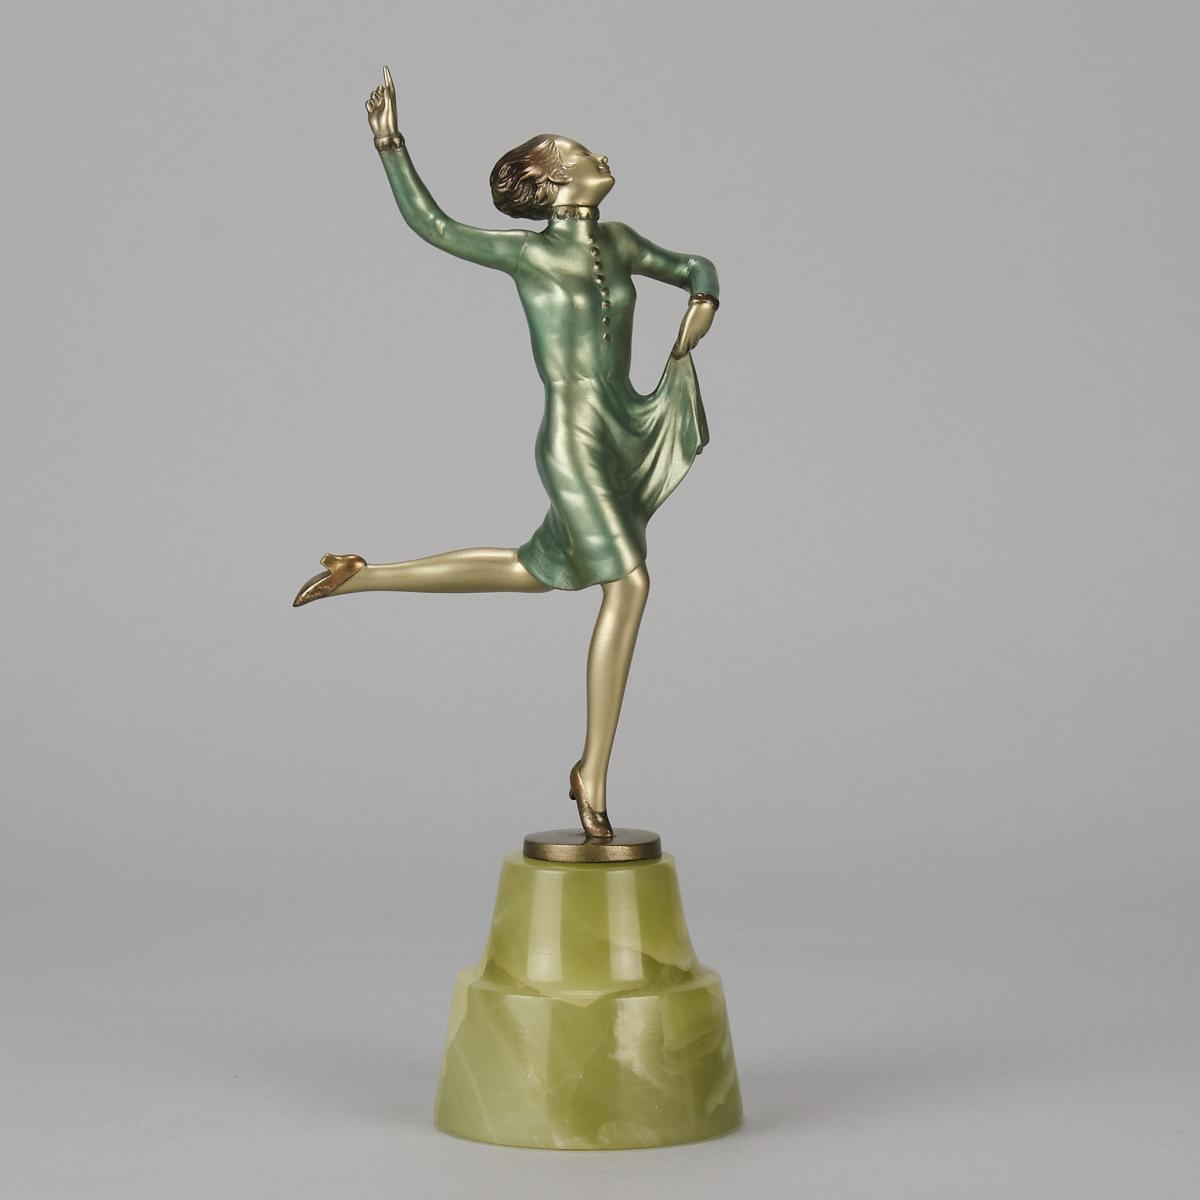 Early 20th Century Cold-Painted Bronze entitled "Running Girl" by Josef Lorenzl